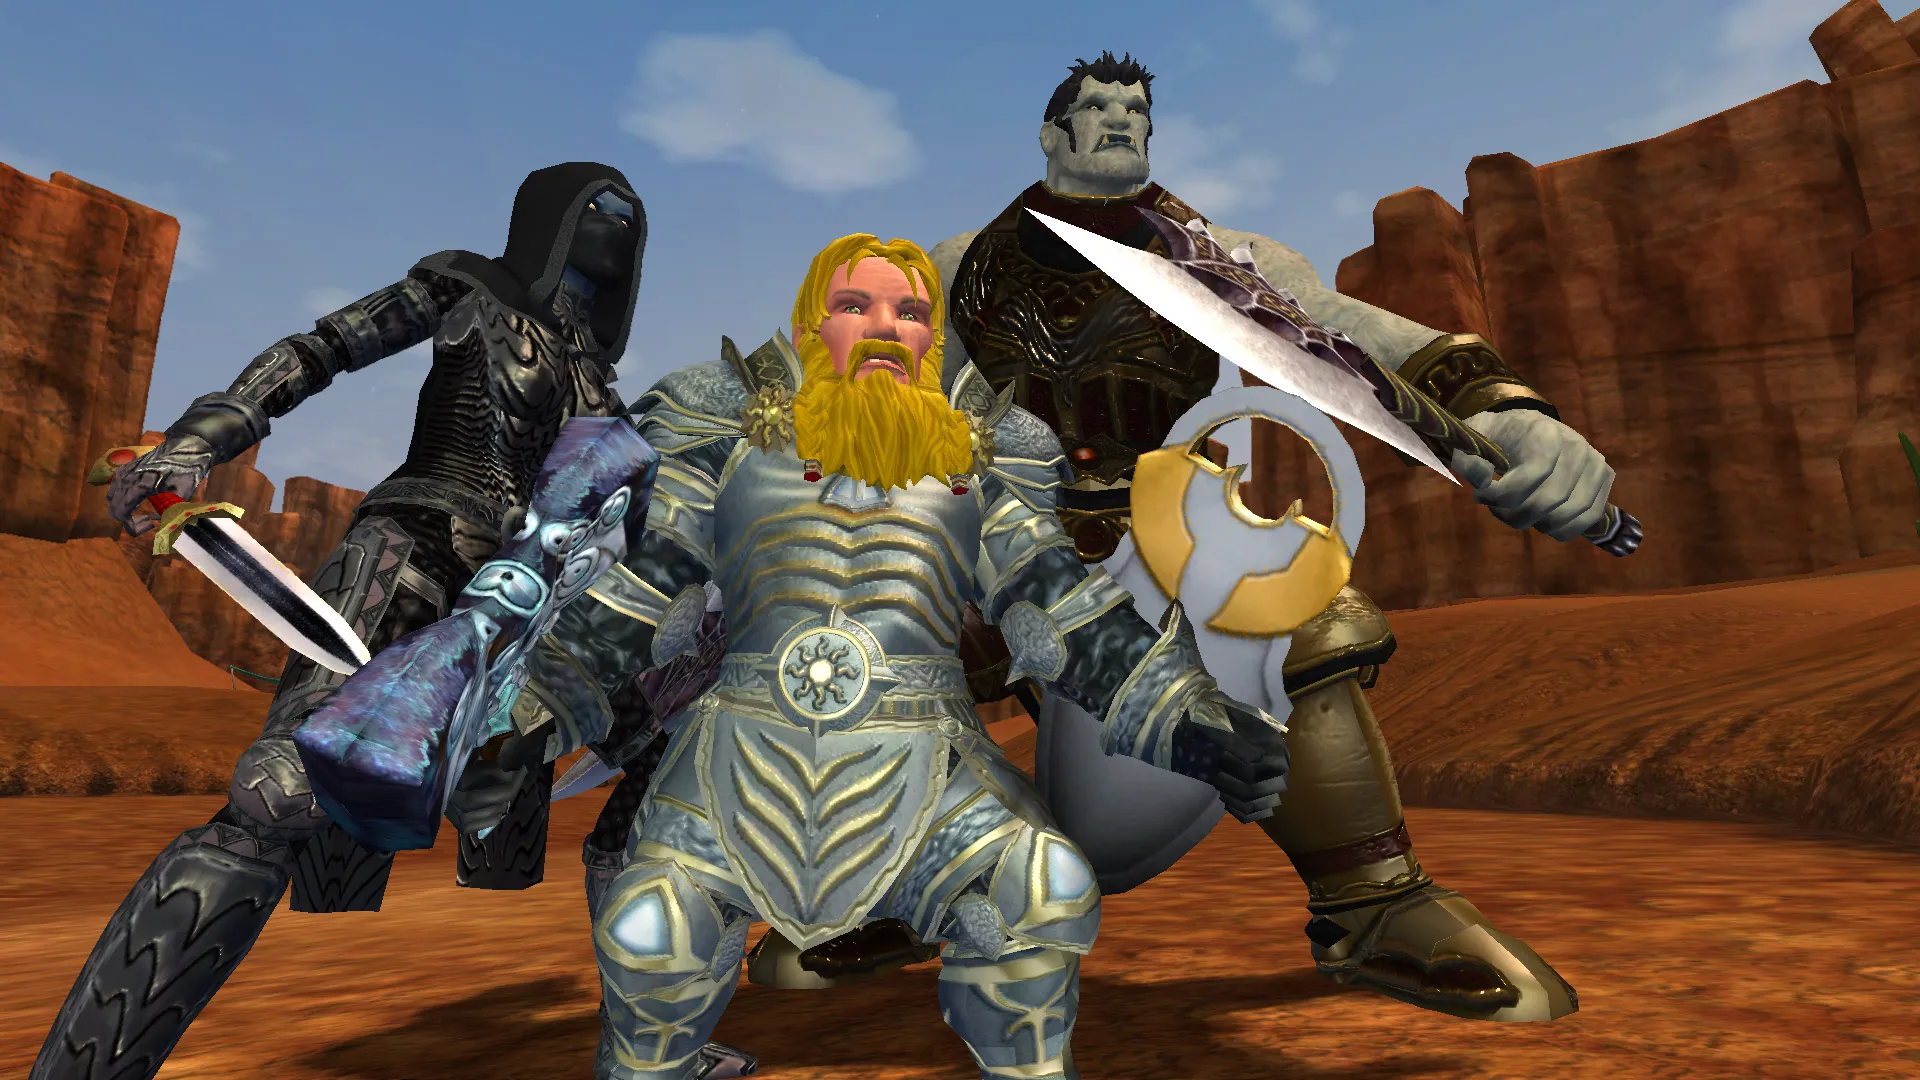 fantasy-mmo-games-everquest-2-extended-players-screenshot.jpg